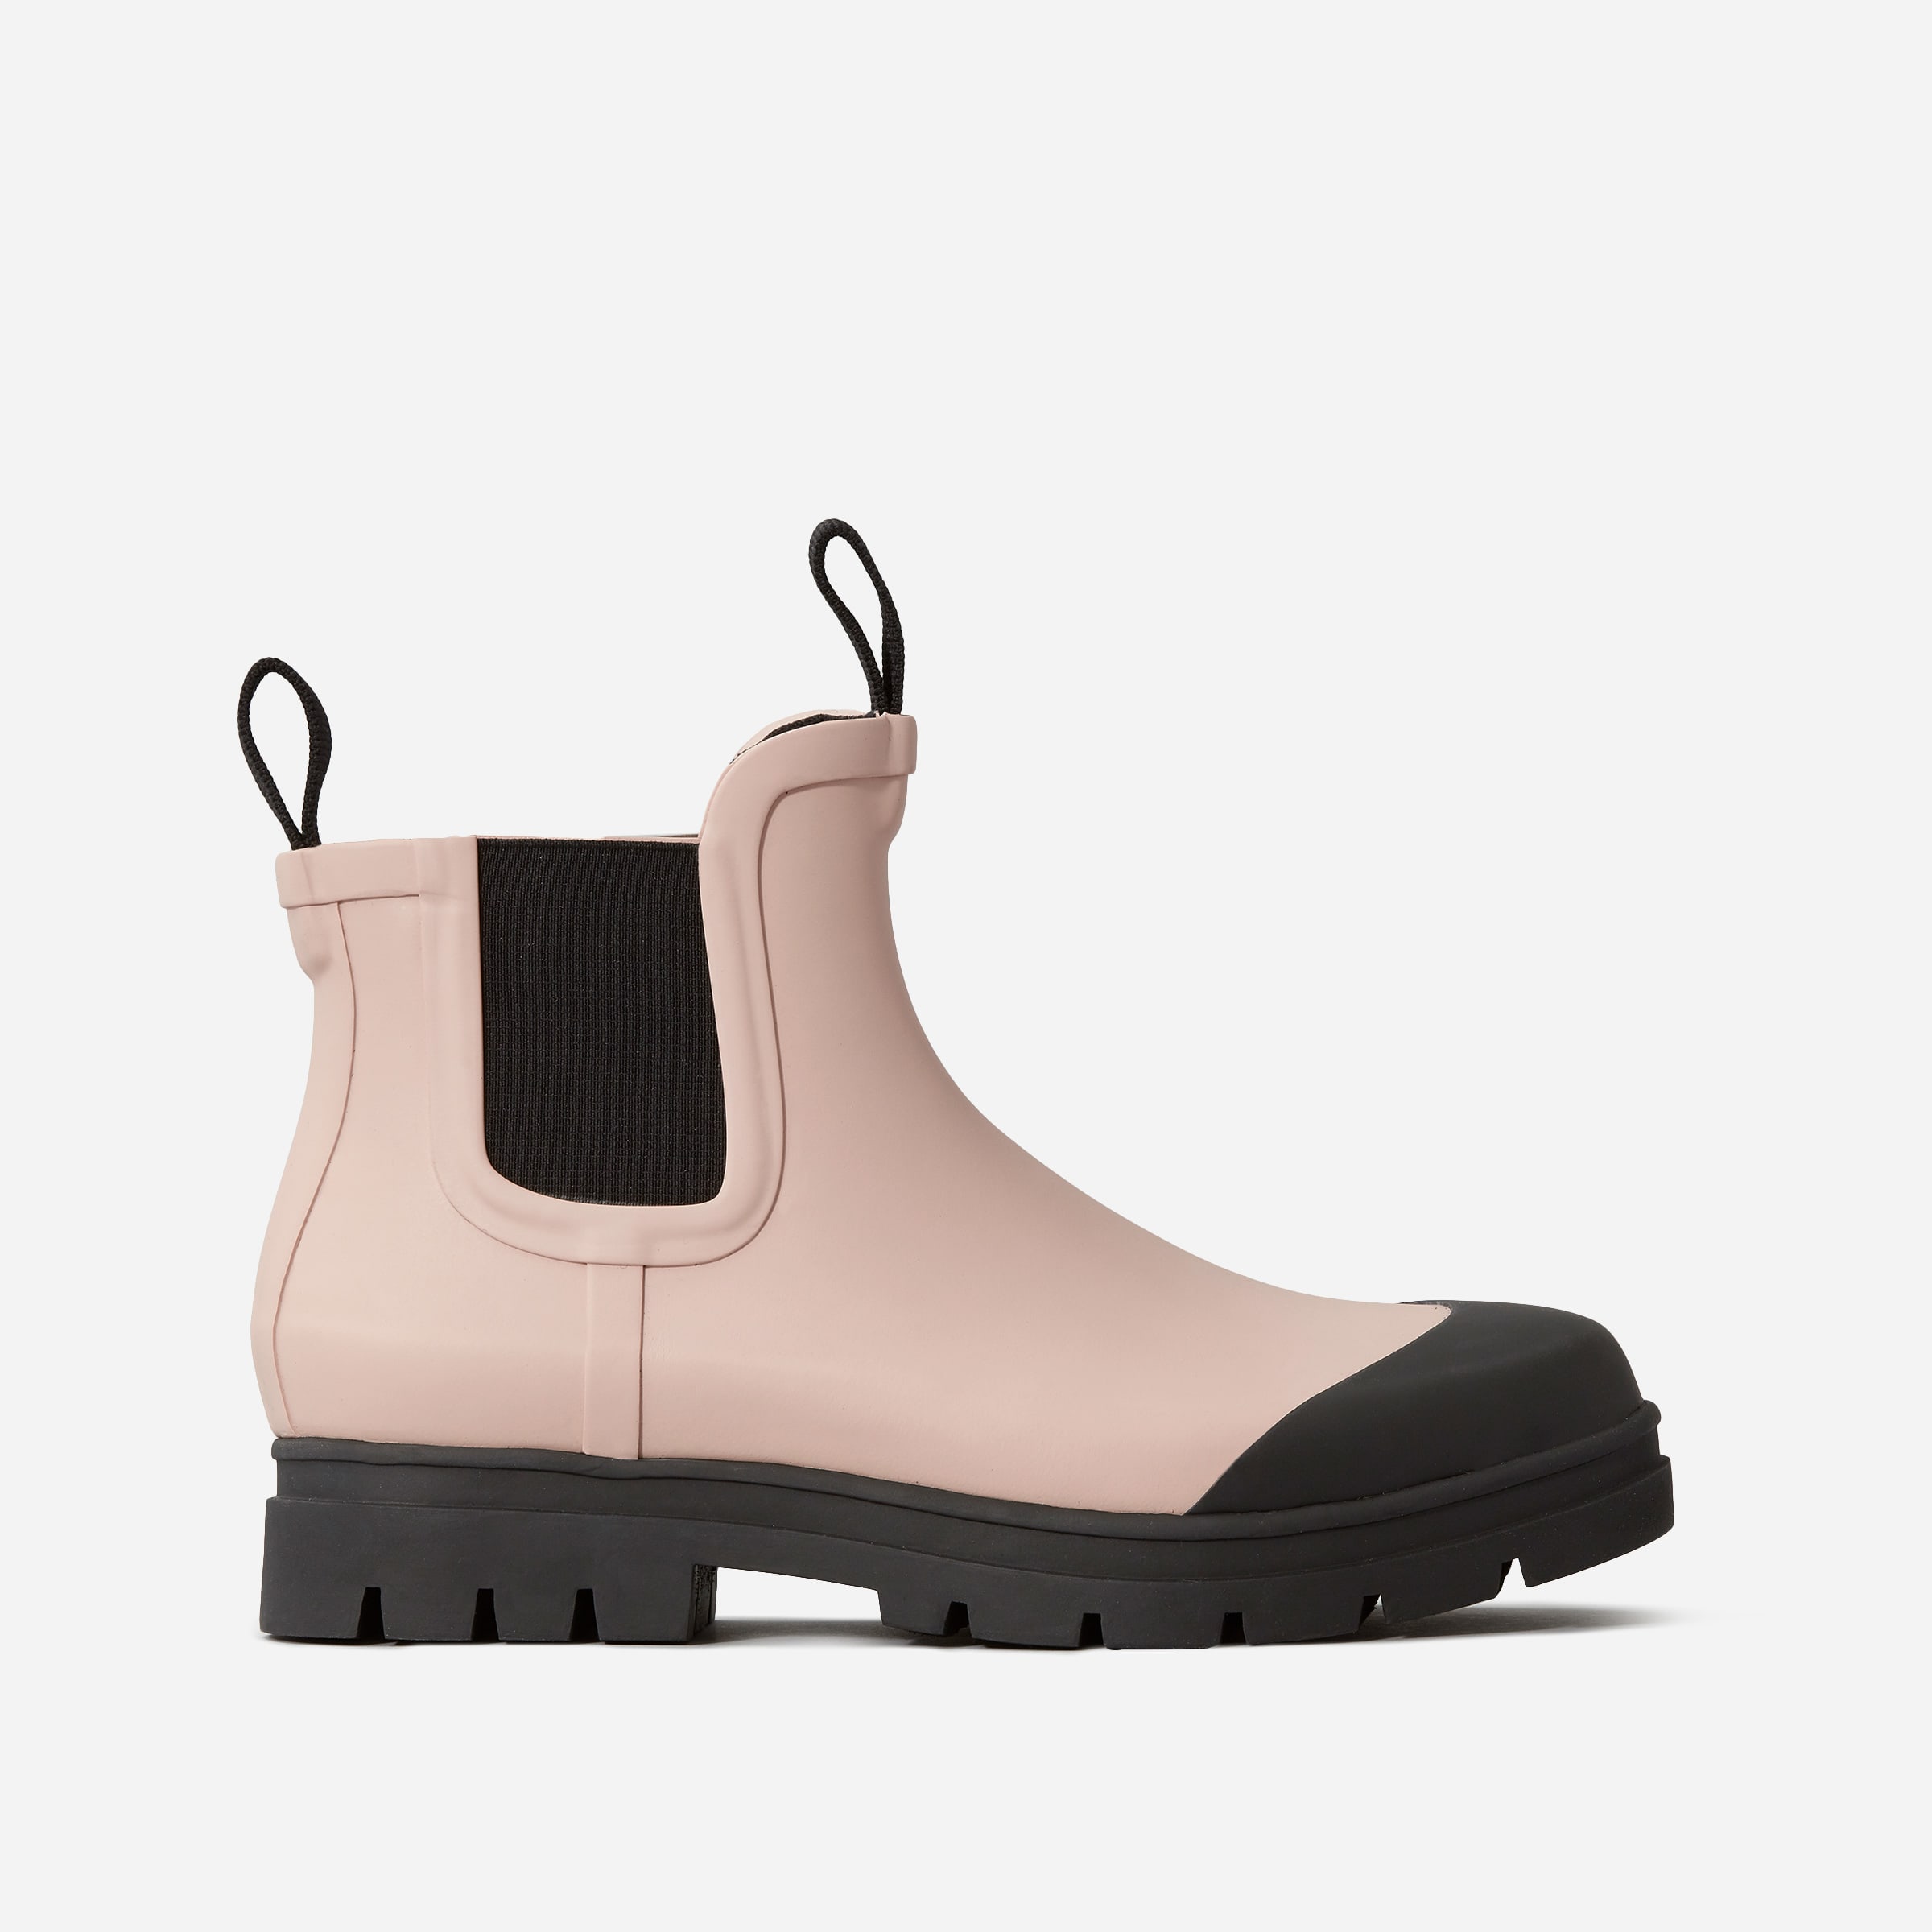 h and m rain boots